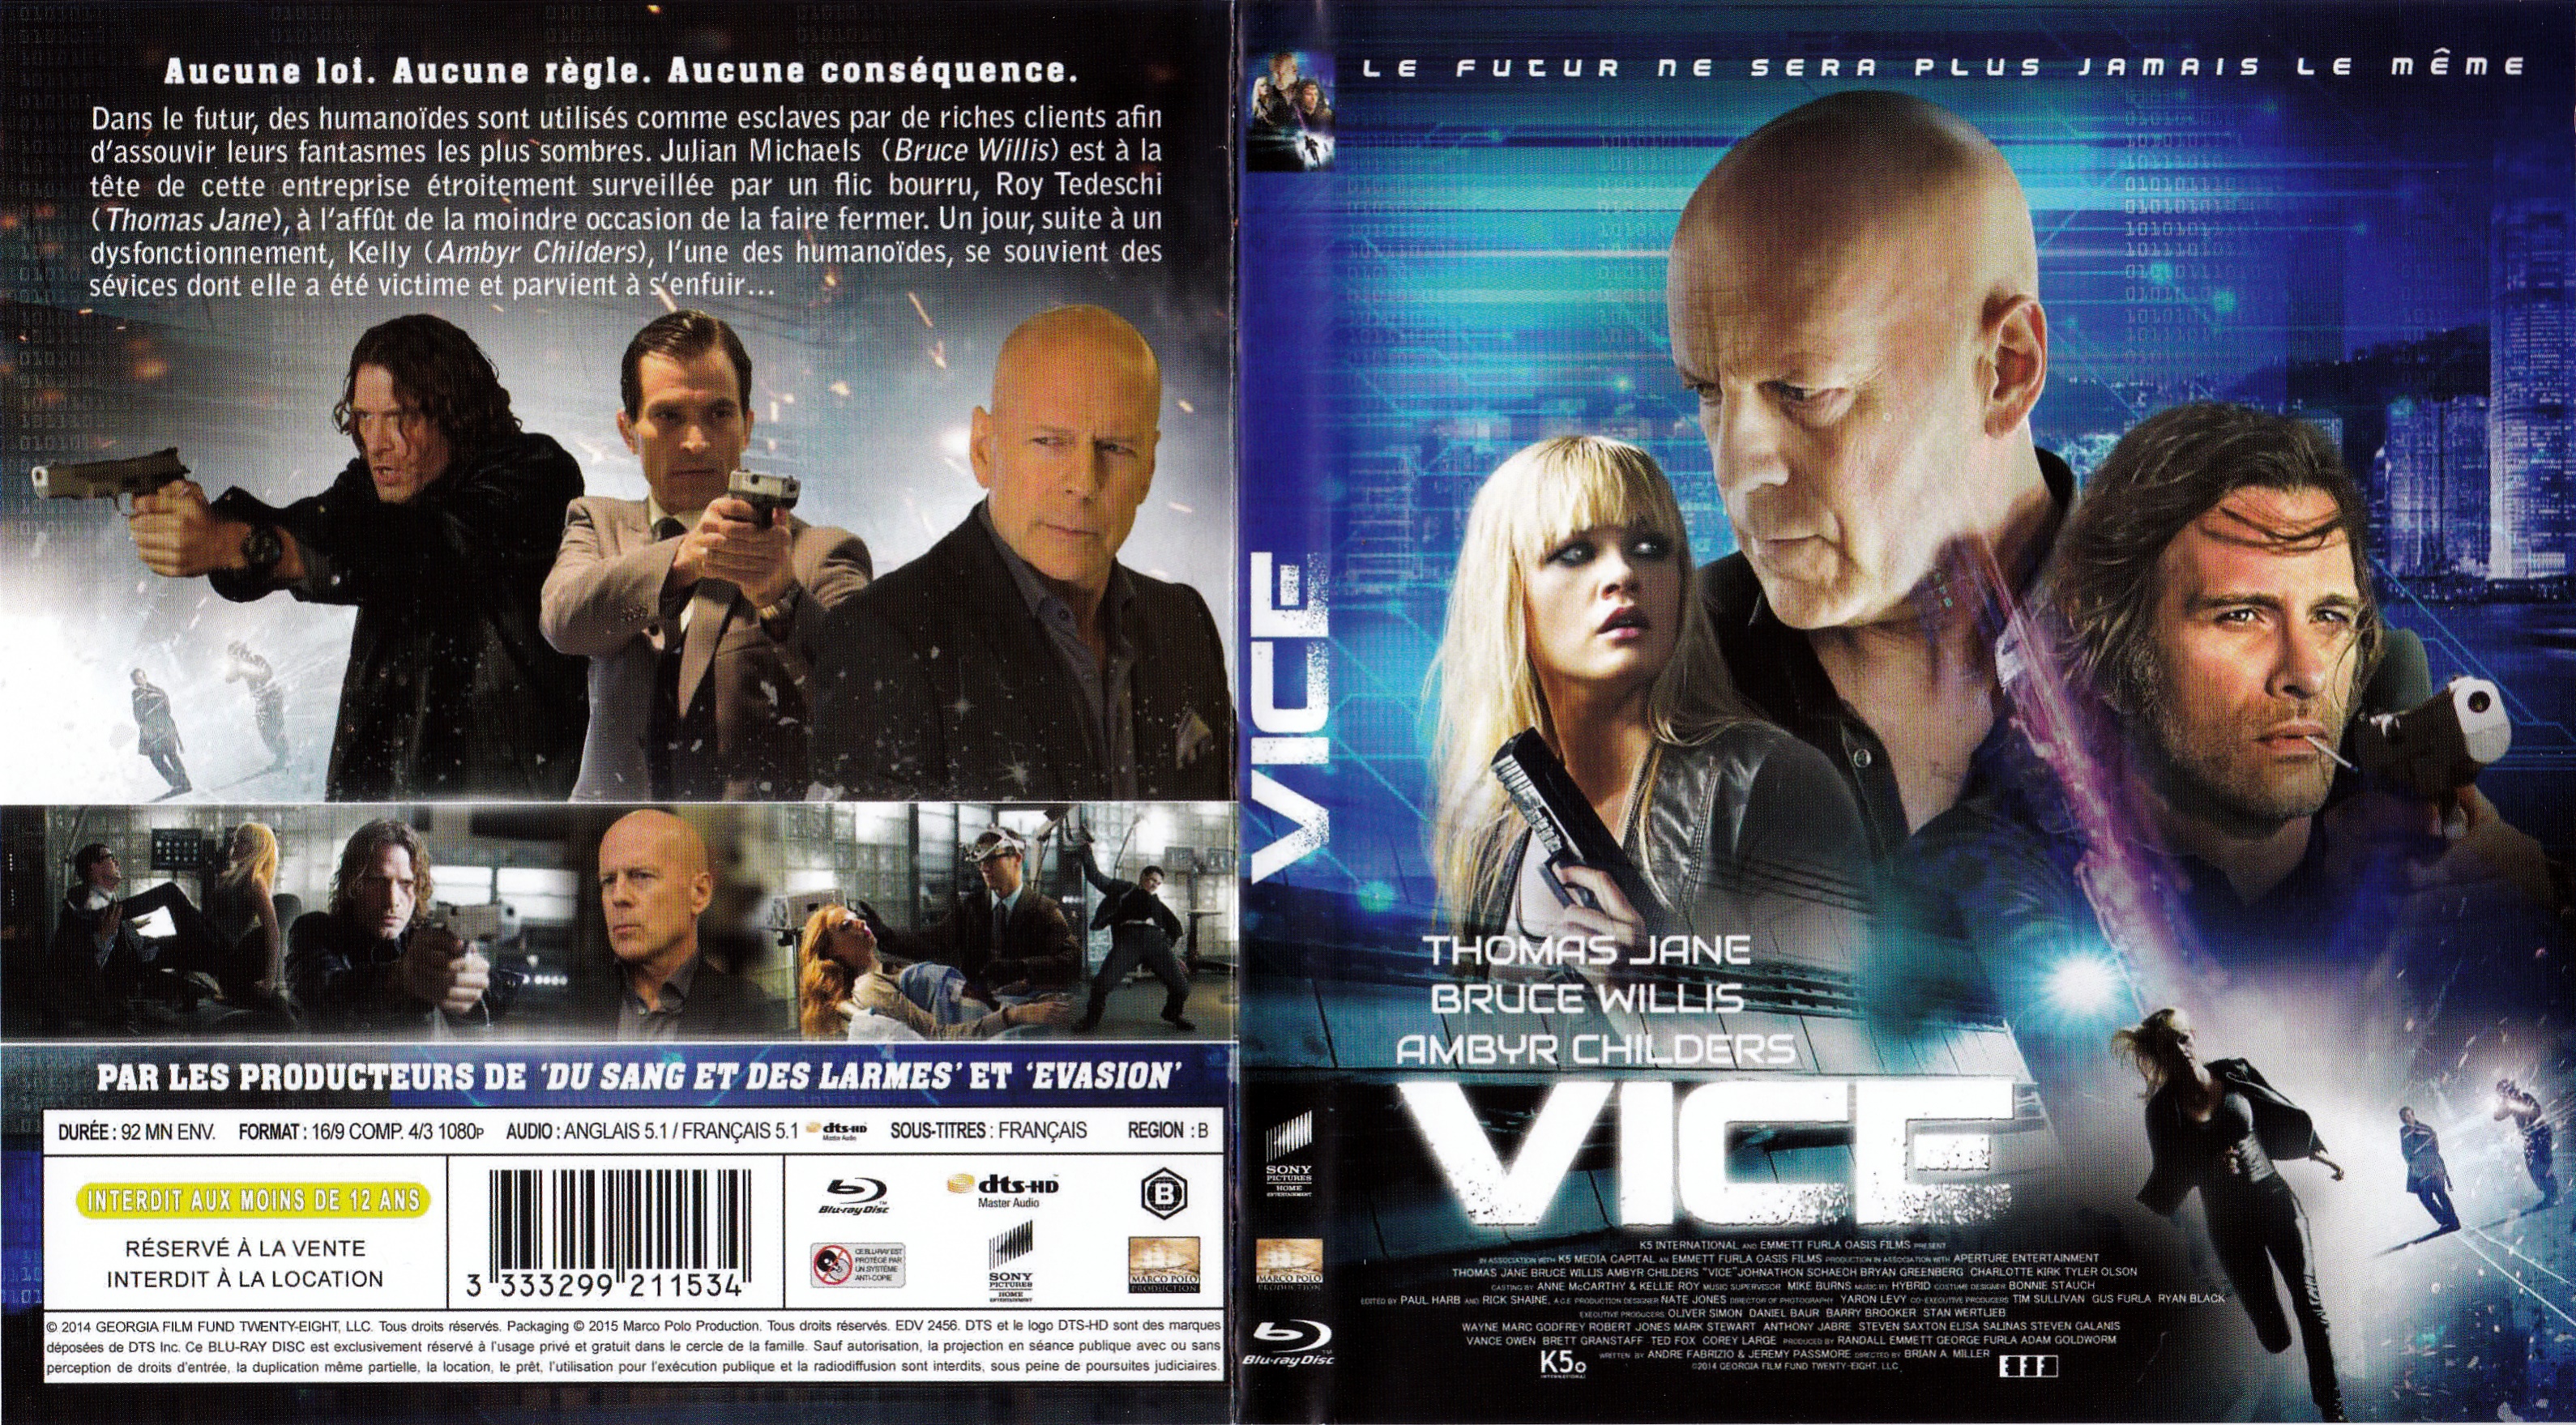 Jaquette DVD Vice 2014 (BLU-RAY)